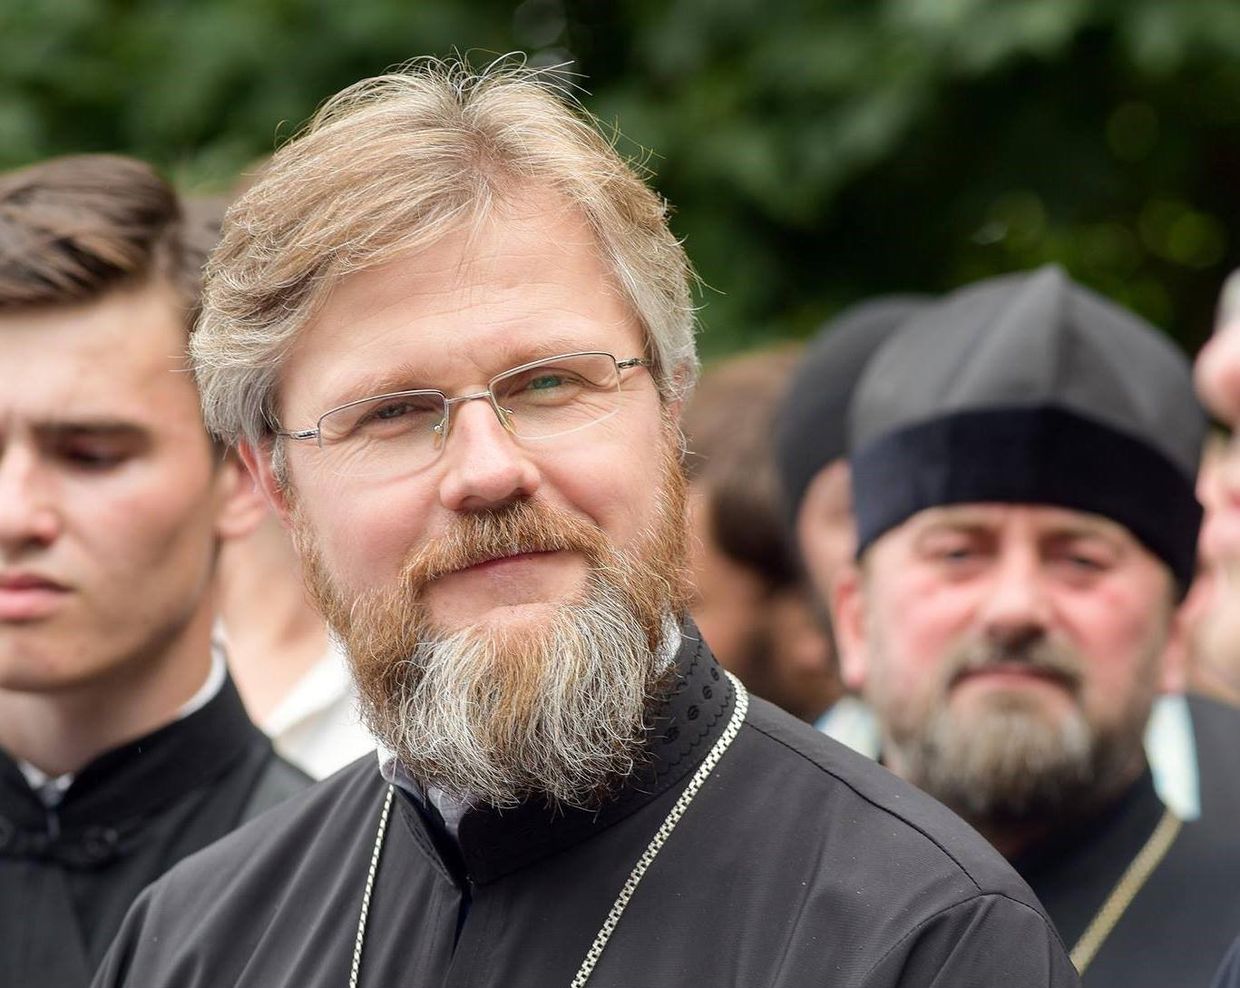 Sources: SBU carries out searches at high-ranking priest of Moscow-linked church